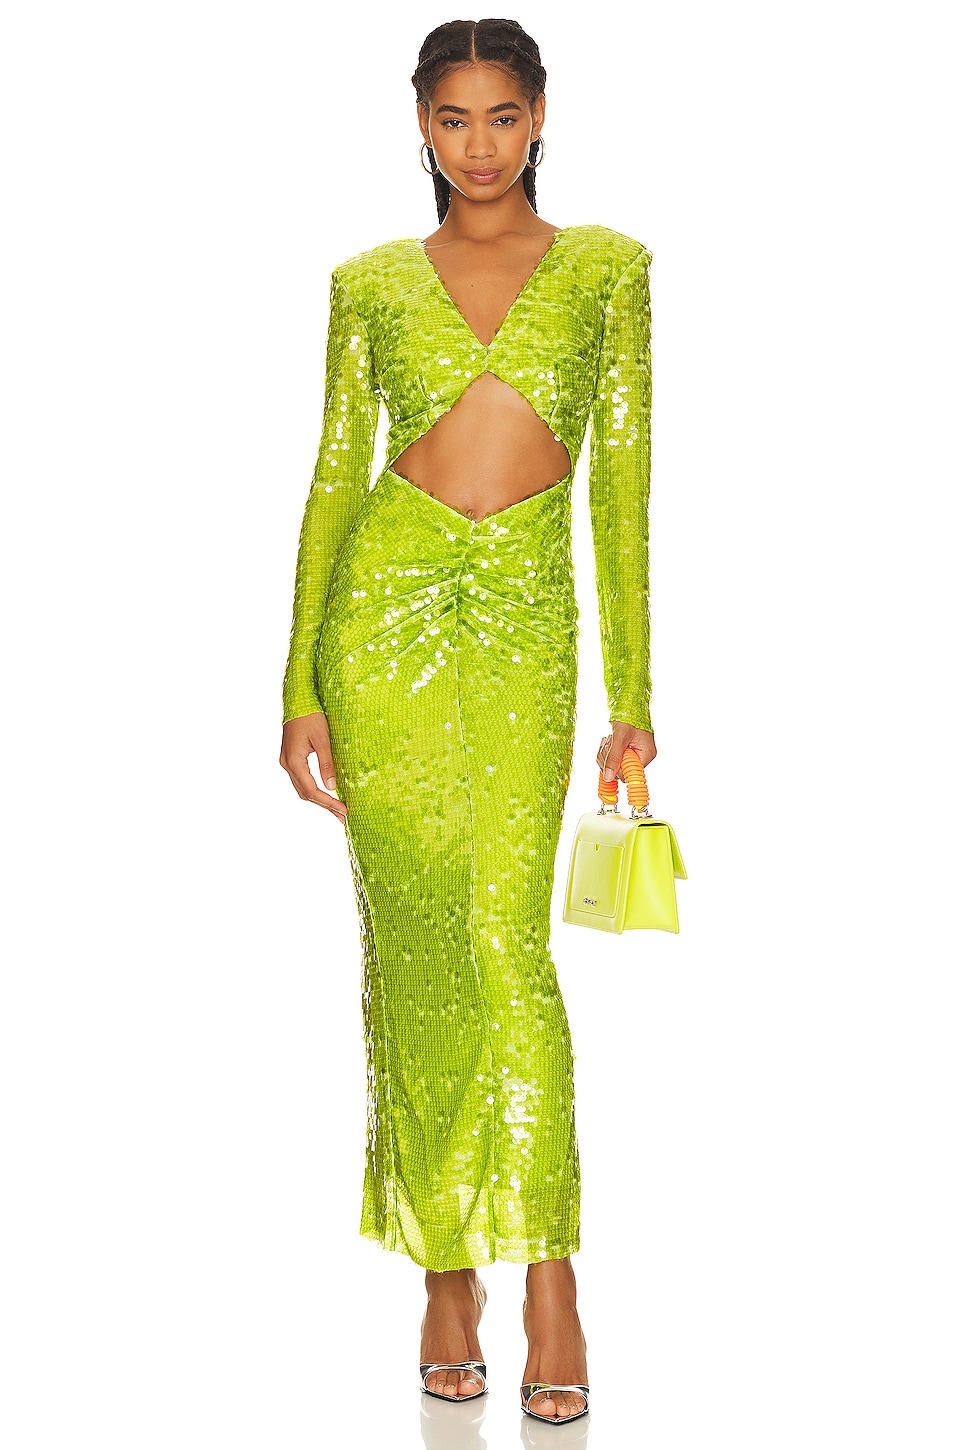 Shop Auroral Sequined Dress from Sudietuz at Seezona